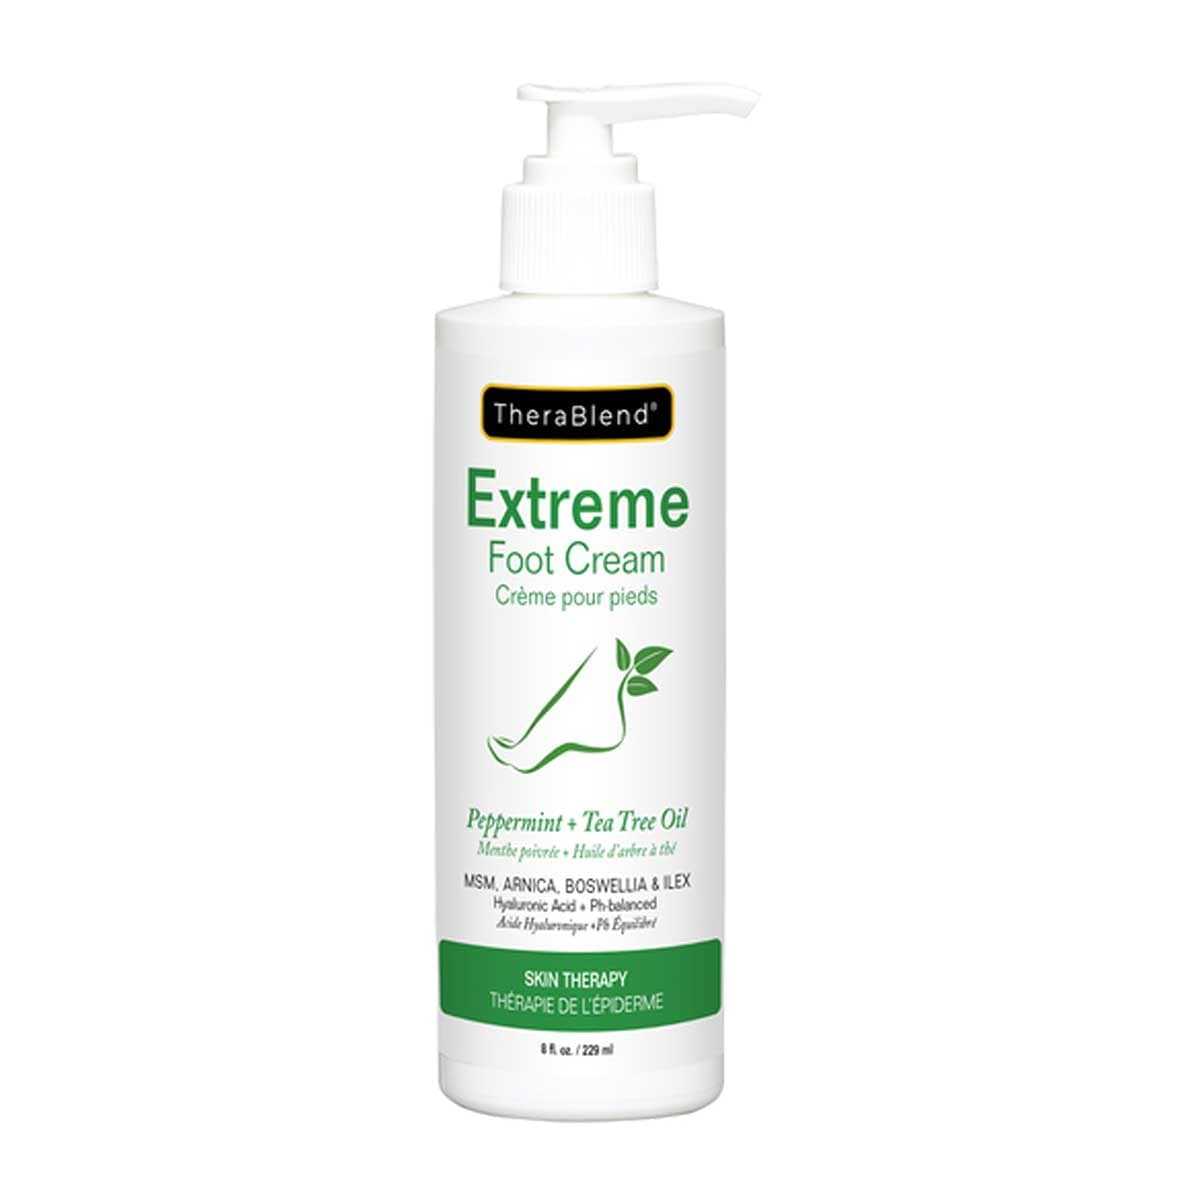 Therablend Extreme Foot Cream 8 oz